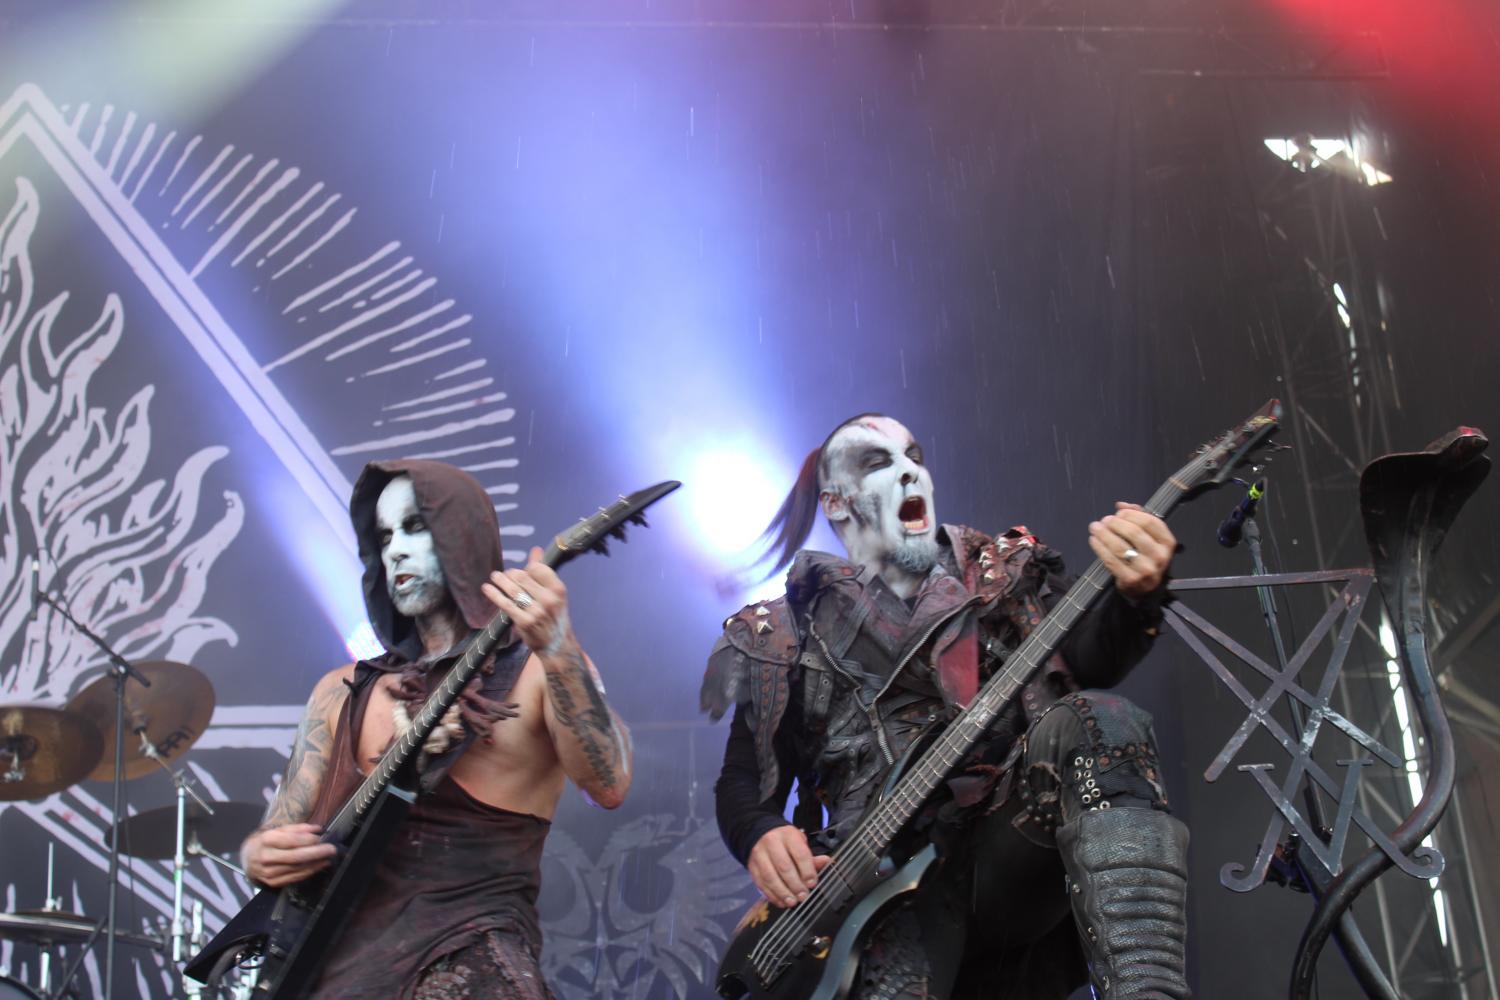 The band Behemoth played at Chicago Open Air